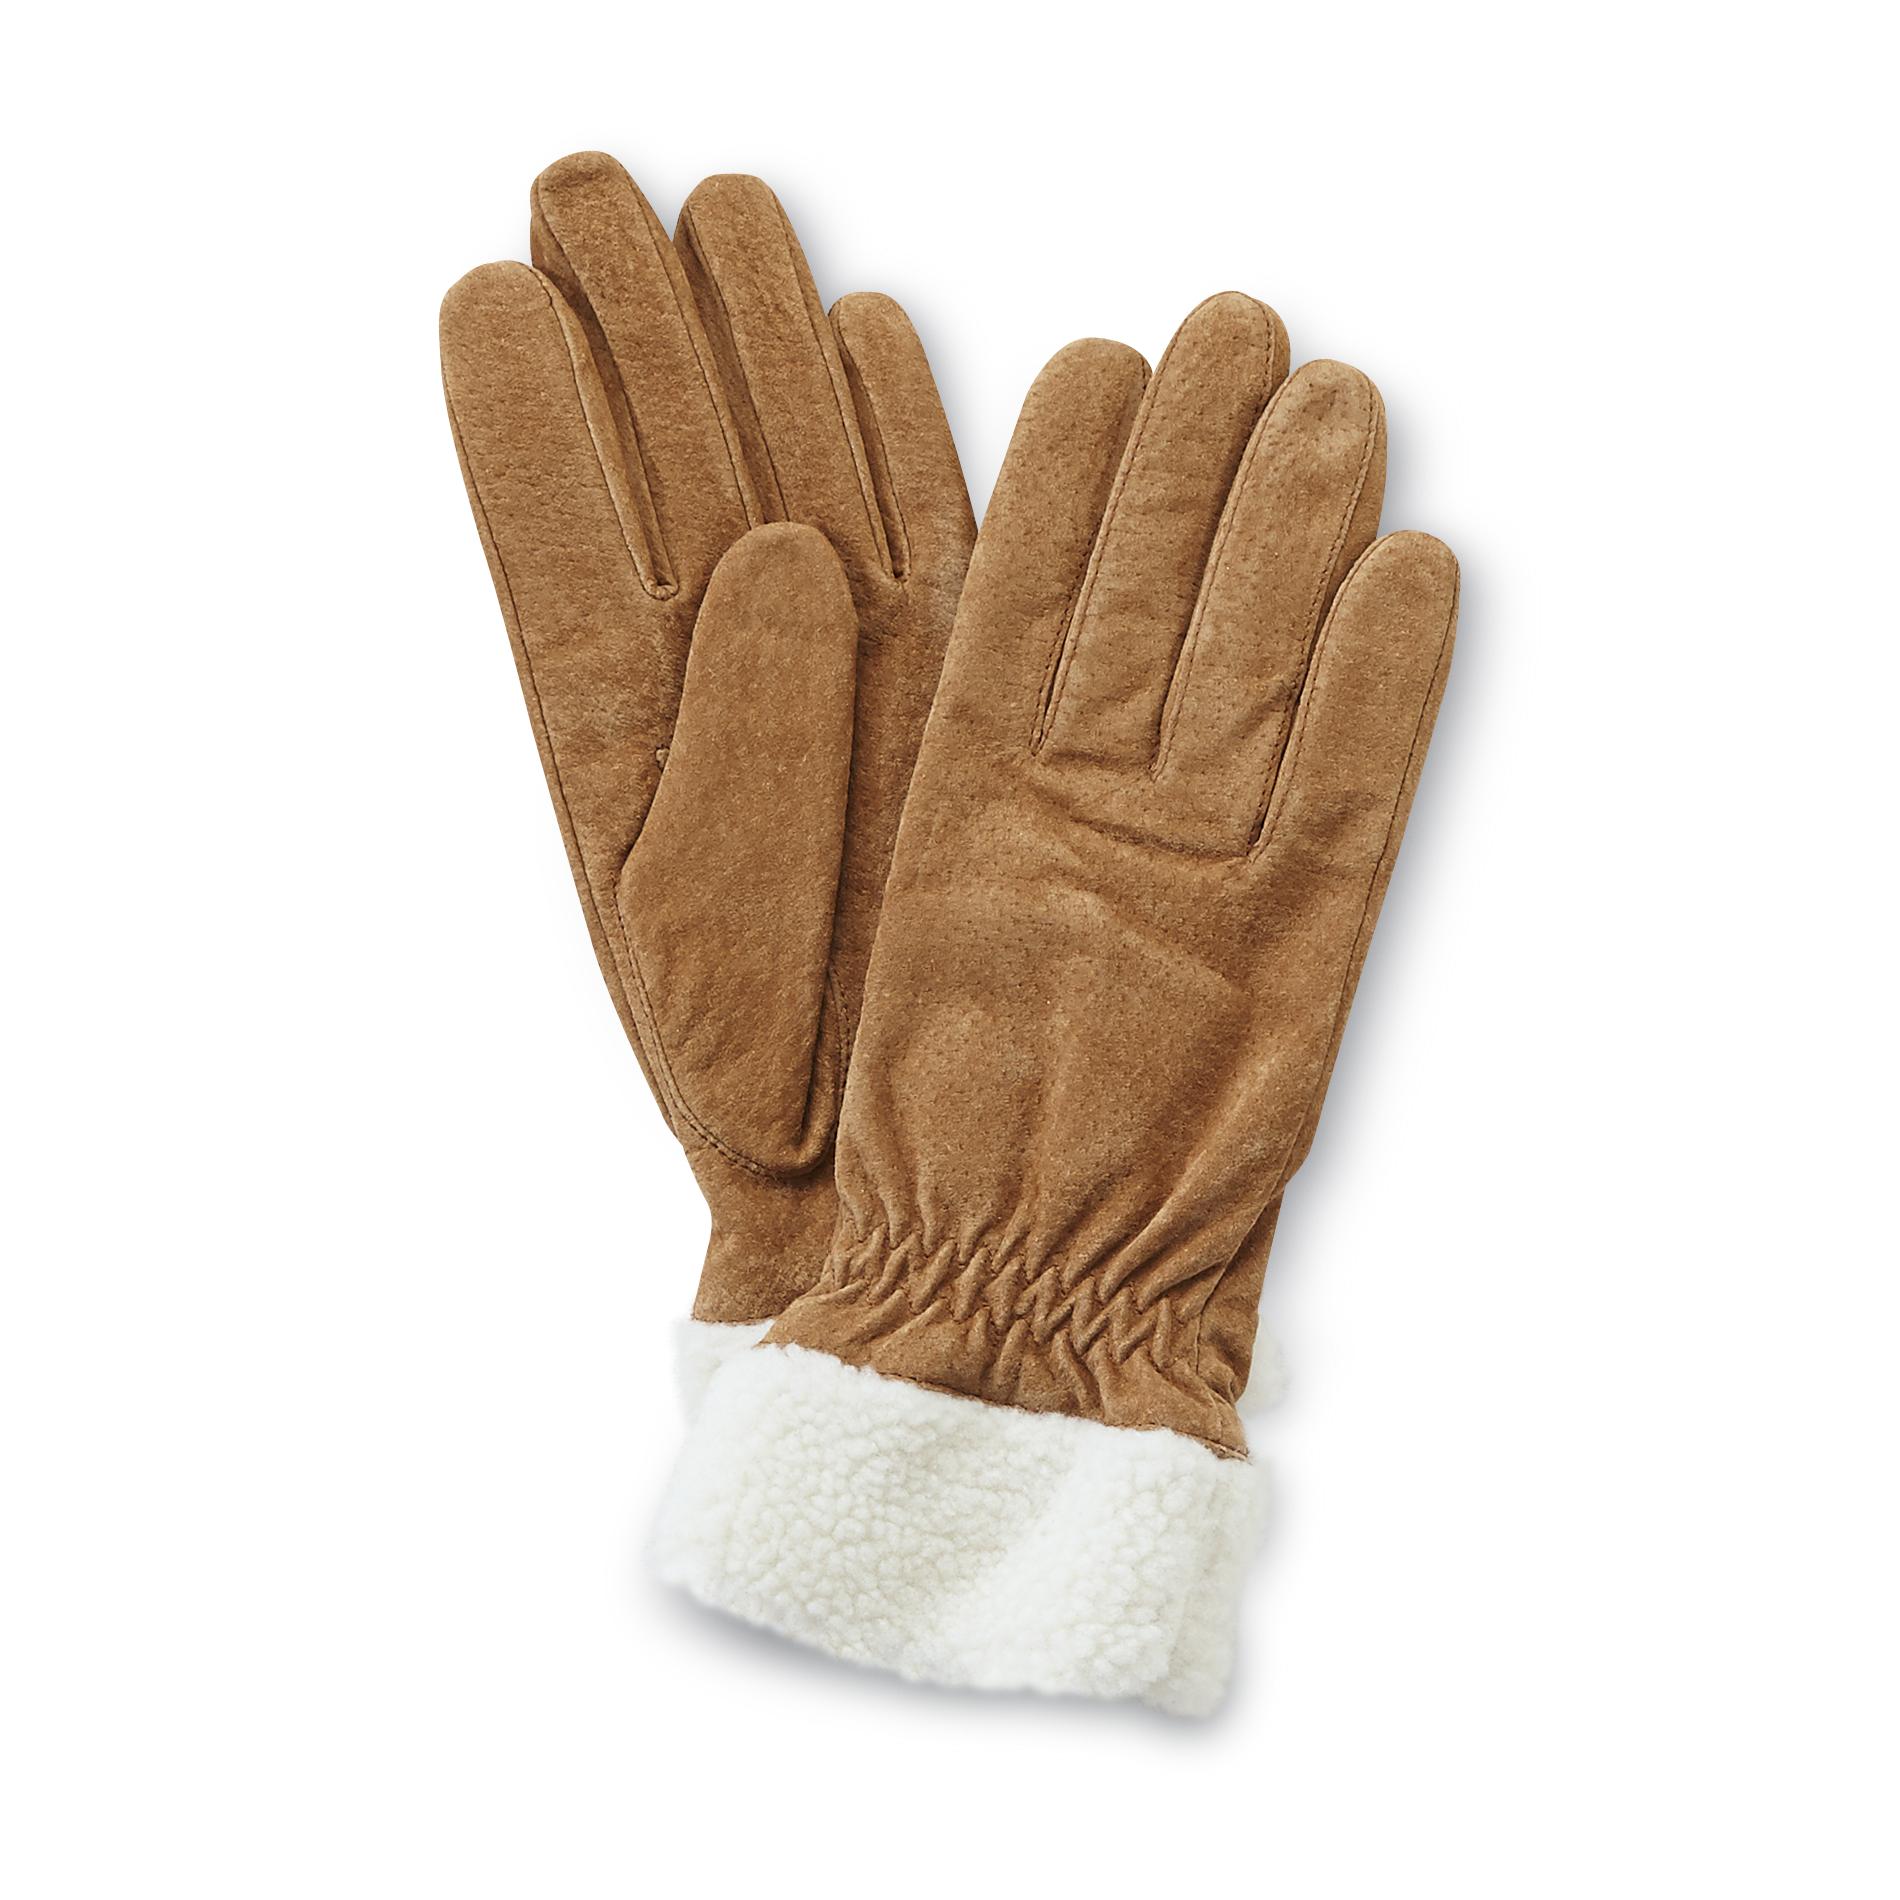 Jaclyn Smith Women's Insulated Suede Gloves